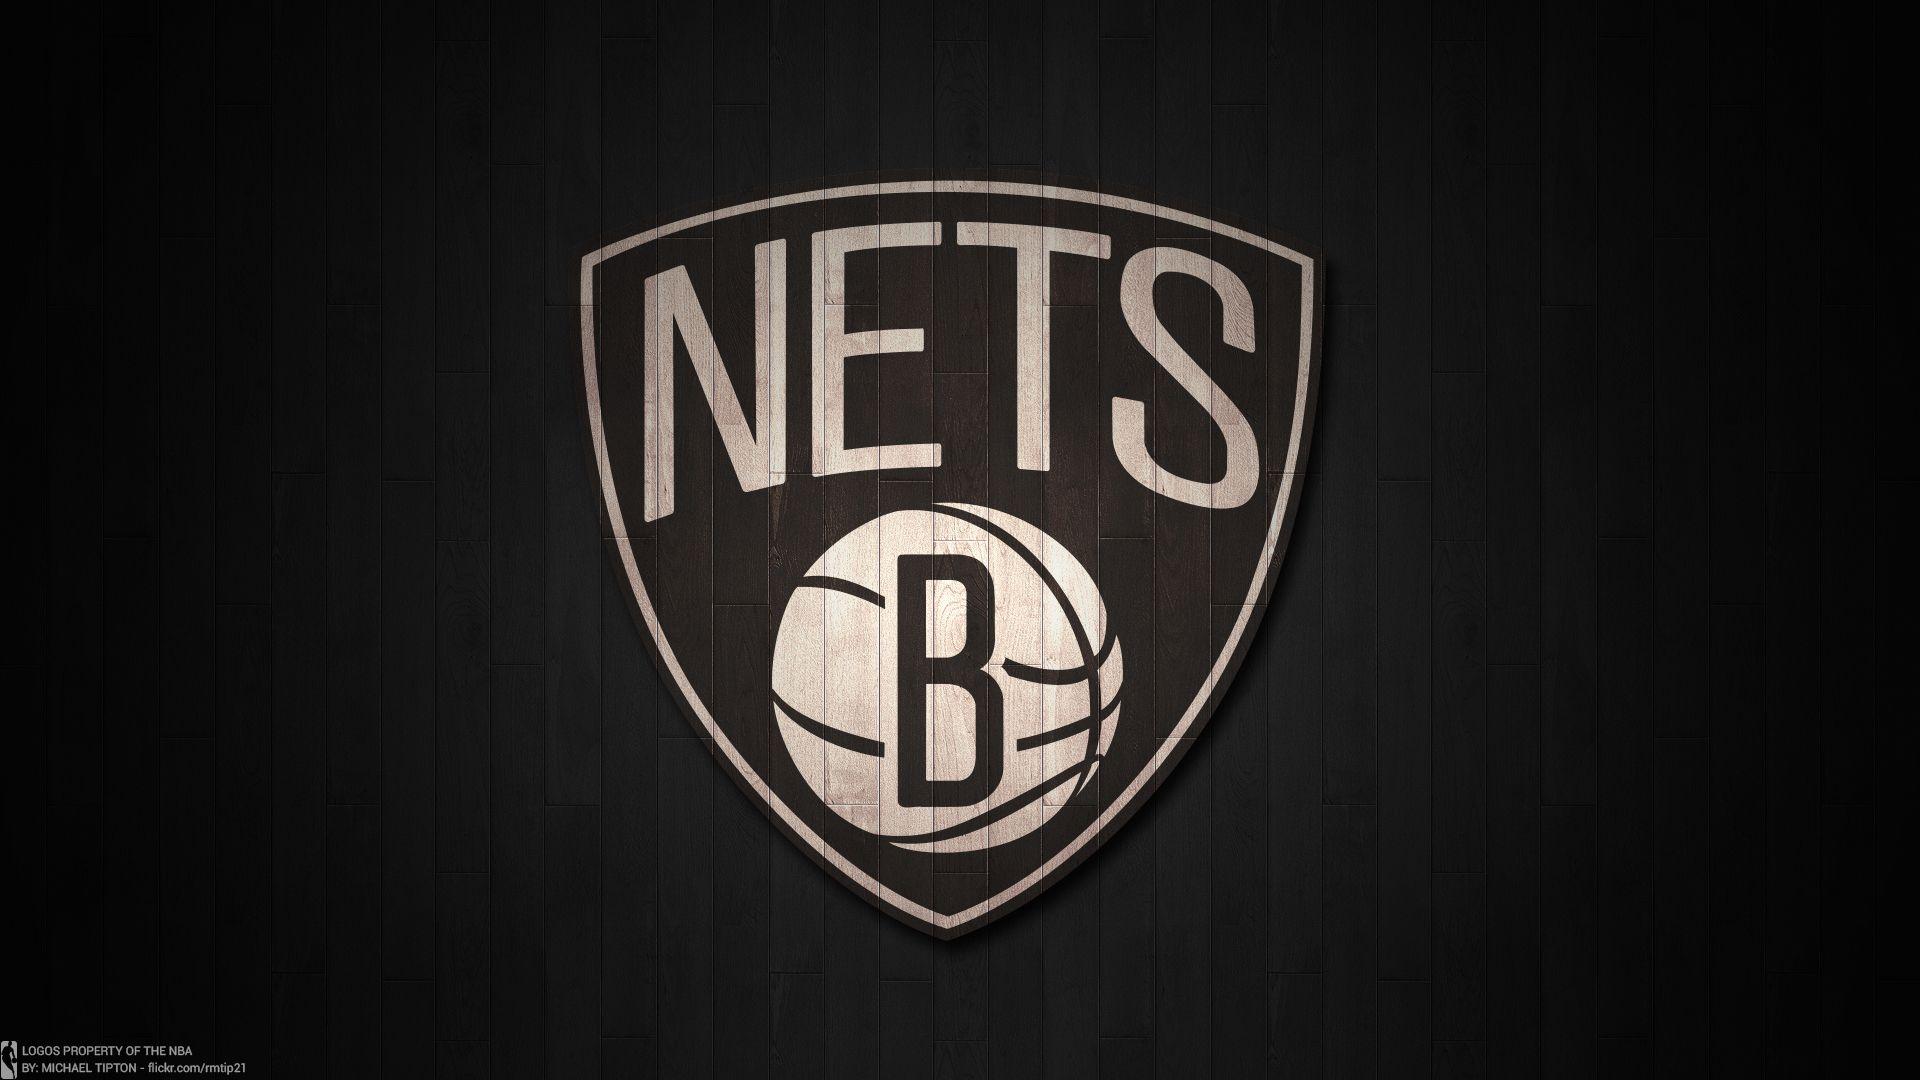 Brooklyn Nets Wallpaper High Resolution and Quality Download